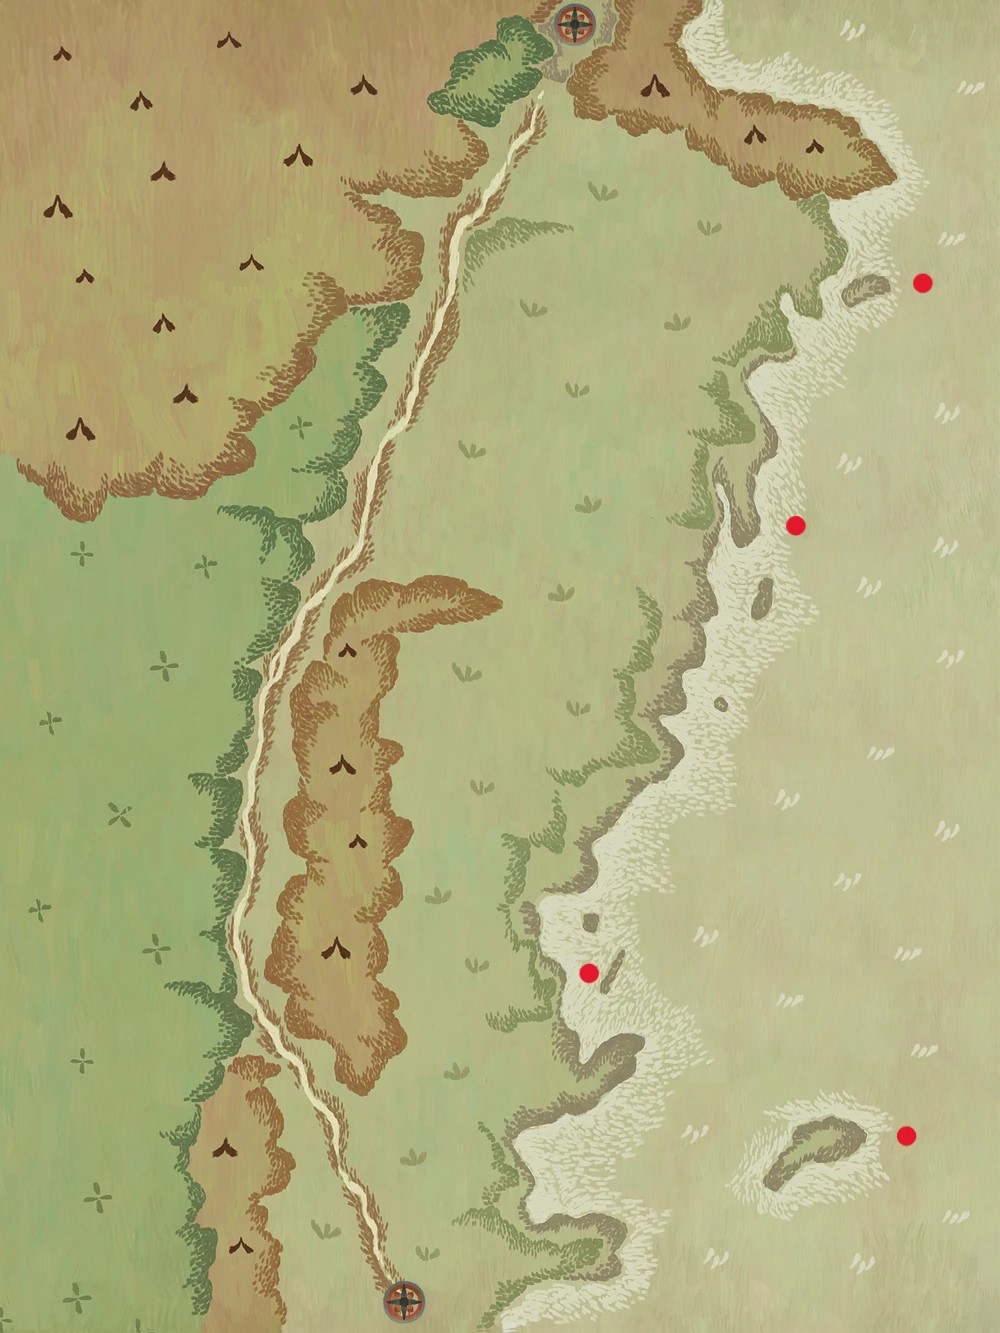 Book of Travels - Fishing Map Location - Fishing Map - 9DC2A3E